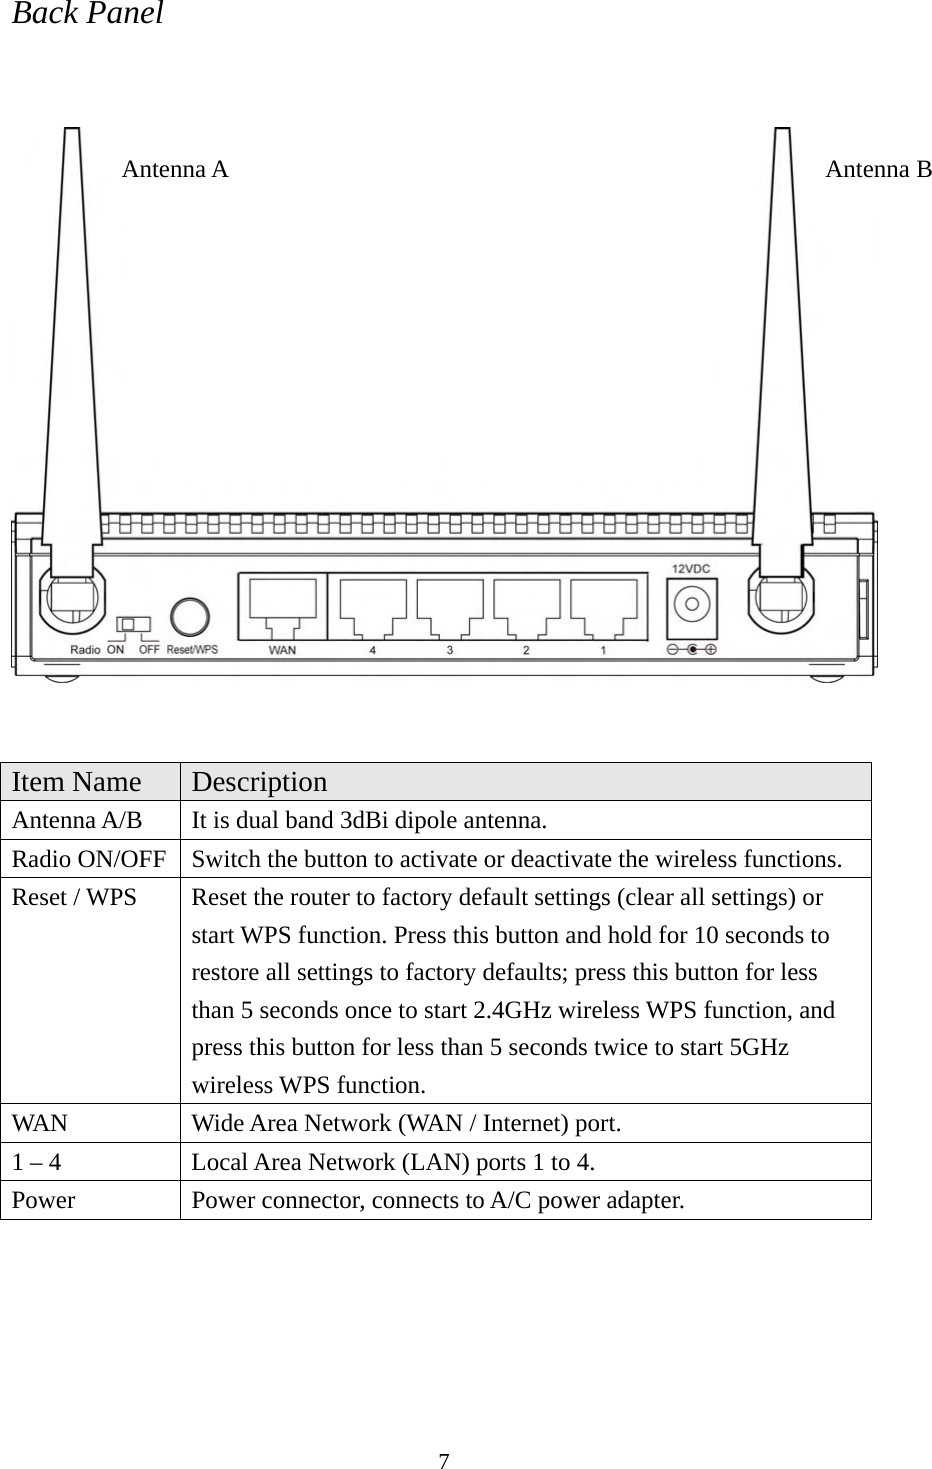 7 Back Panel     Item Name  Description Antenna A/B  It is dual band 3dBi dipole antenna. Radio ON/OFF  Switch the button to activate or deactivate the wireless functions. Reset / WPS  Reset the router to factory default settings (clear all settings) or start WPS function. Press this button and hold for 10 seconds to restore all settings to factory defaults; press this button for less than 5 seconds once to start 2.4GHz wireless WPS function, and press this button for less than 5 seconds twice to start 5GHz wireless WPS function. WAN  Wide Area Network (WAN / Internet) port. 1 – 4  Local Area Network (LAN) ports 1 to 4. Power  Power connector, connects to A/C power adapter.  Antenna A  Antenna B 